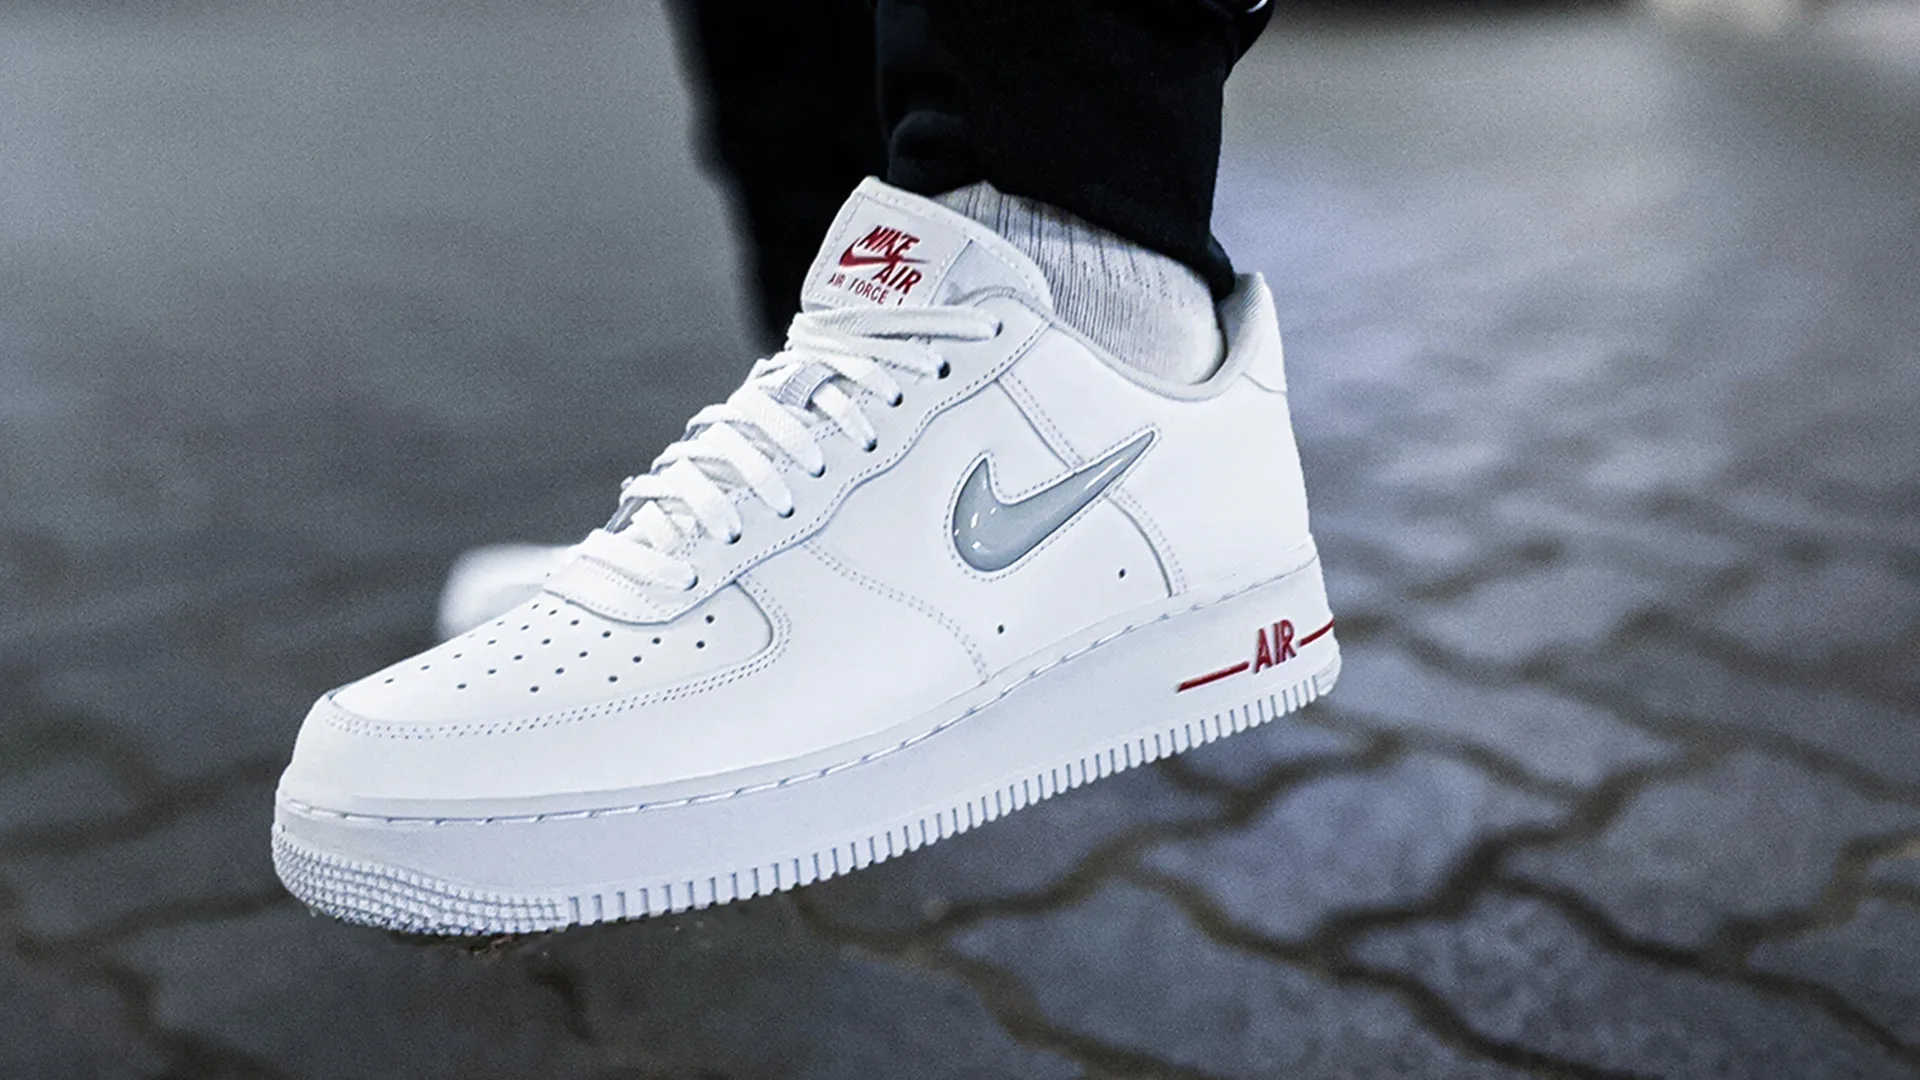 Nike Air Force 1's in white